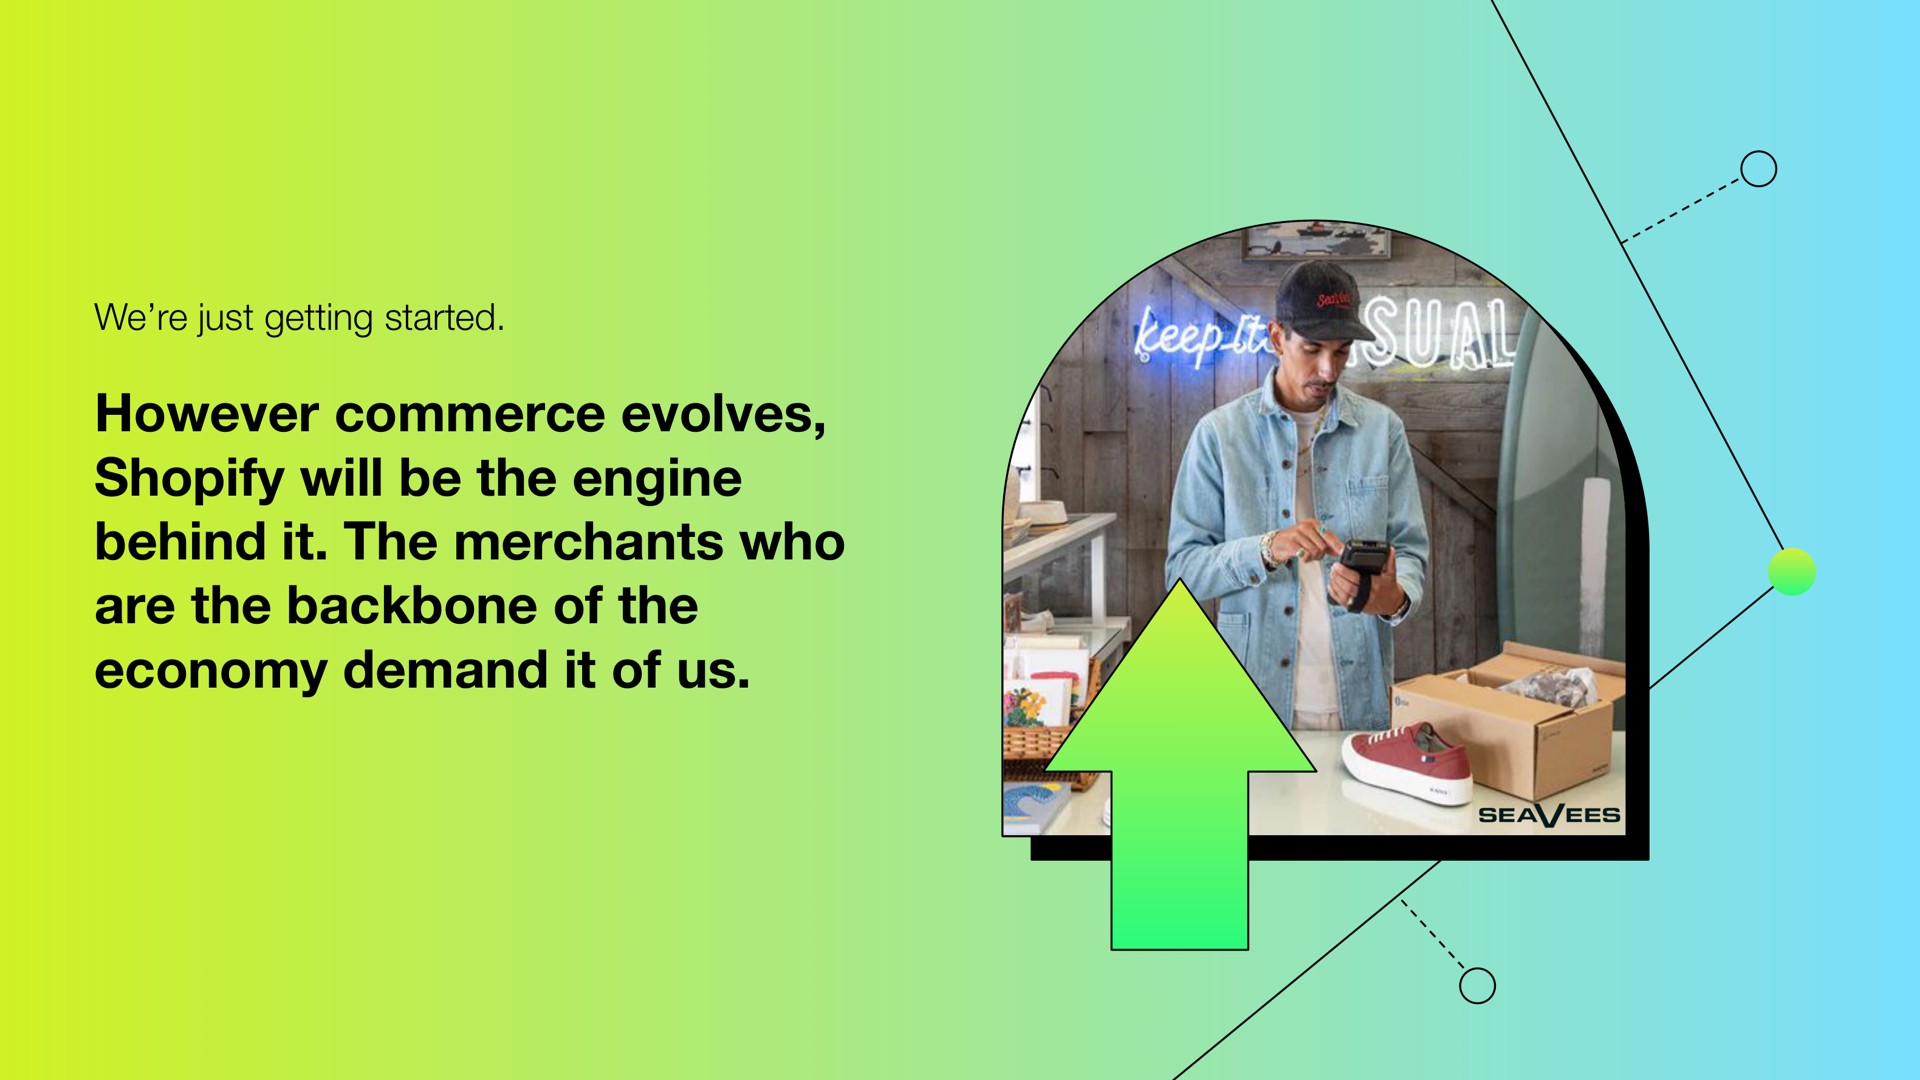 however commerce evolves will be the engine behind it the merchants who are the backbone of the economy demand it of us | Shopify